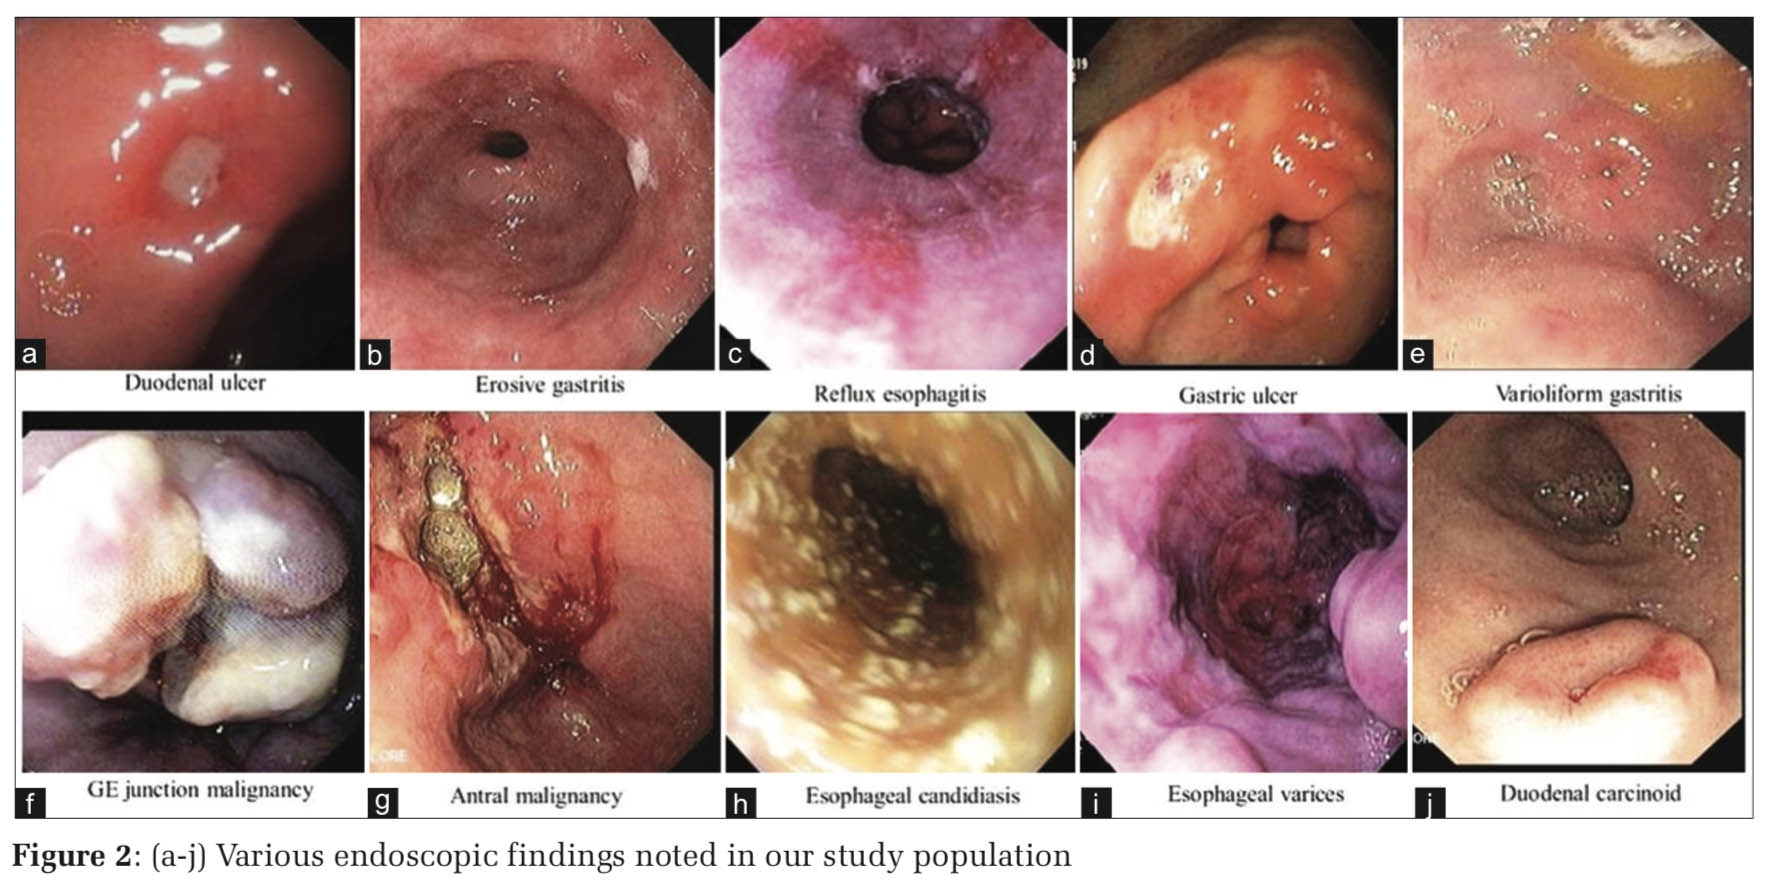 Clinical and Endoscopic Profile of Patients with Uninvestigated Dyspepsia: Experience from a Single Center